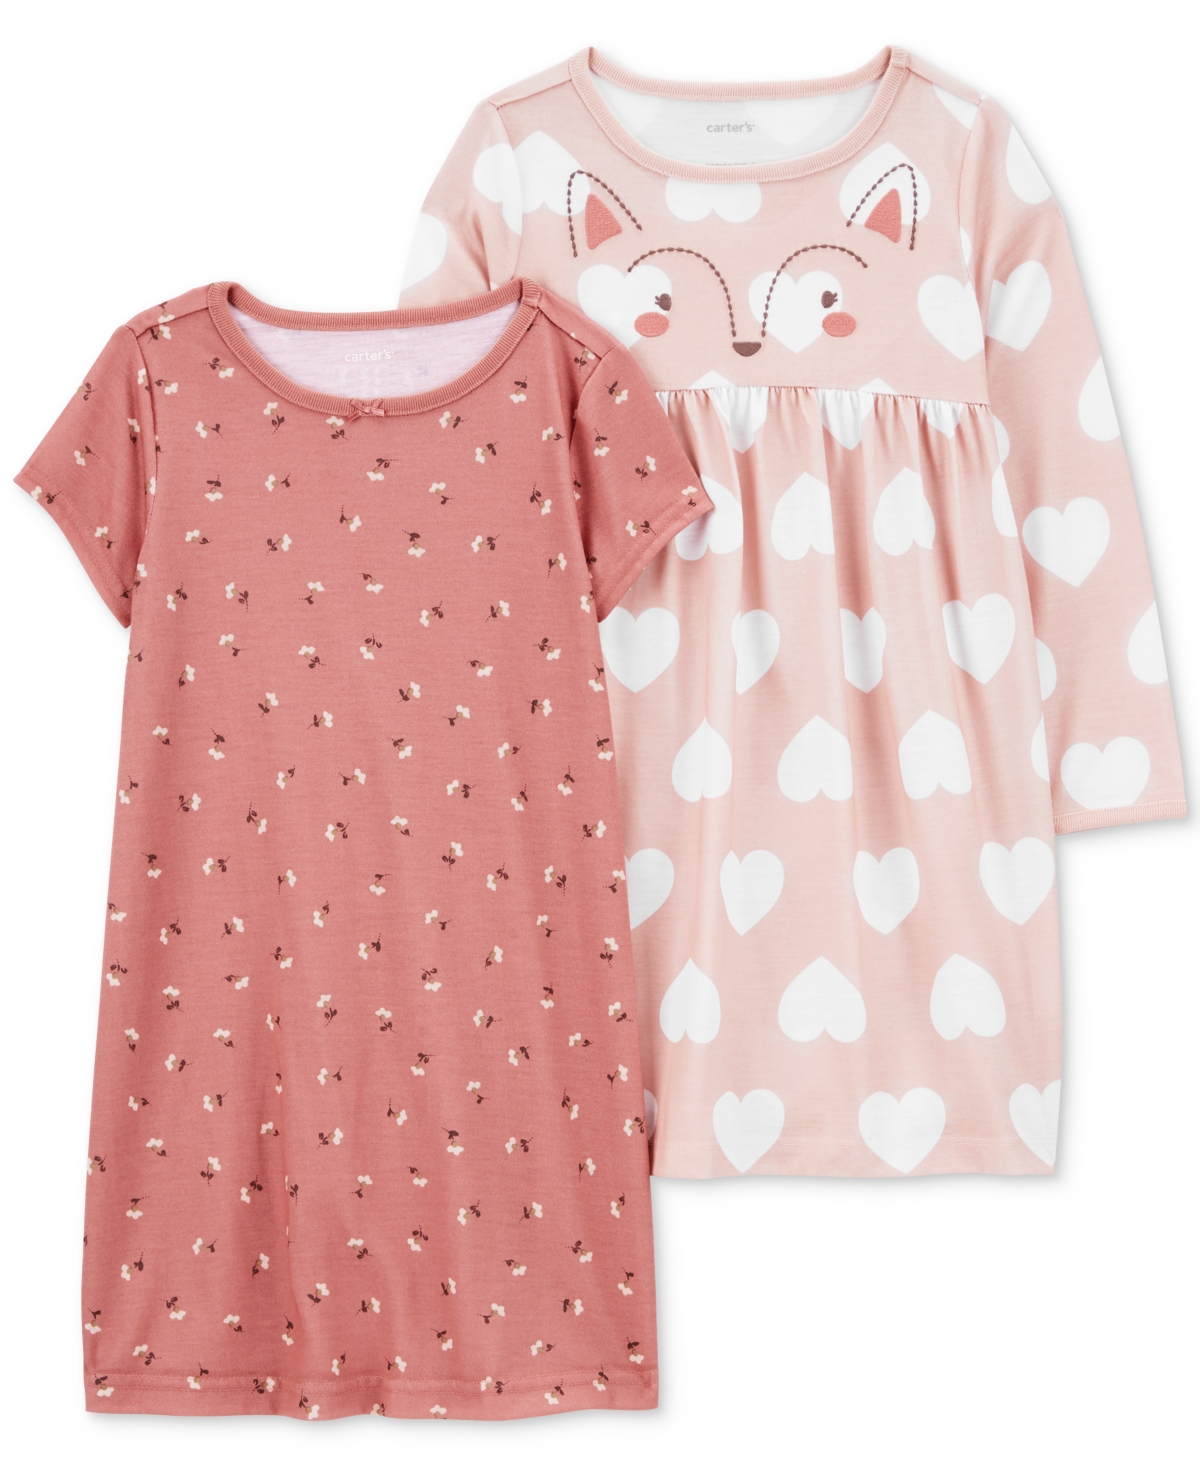 Carter's Kids' Big Girls Printed Nightgowns, Pack Of 2